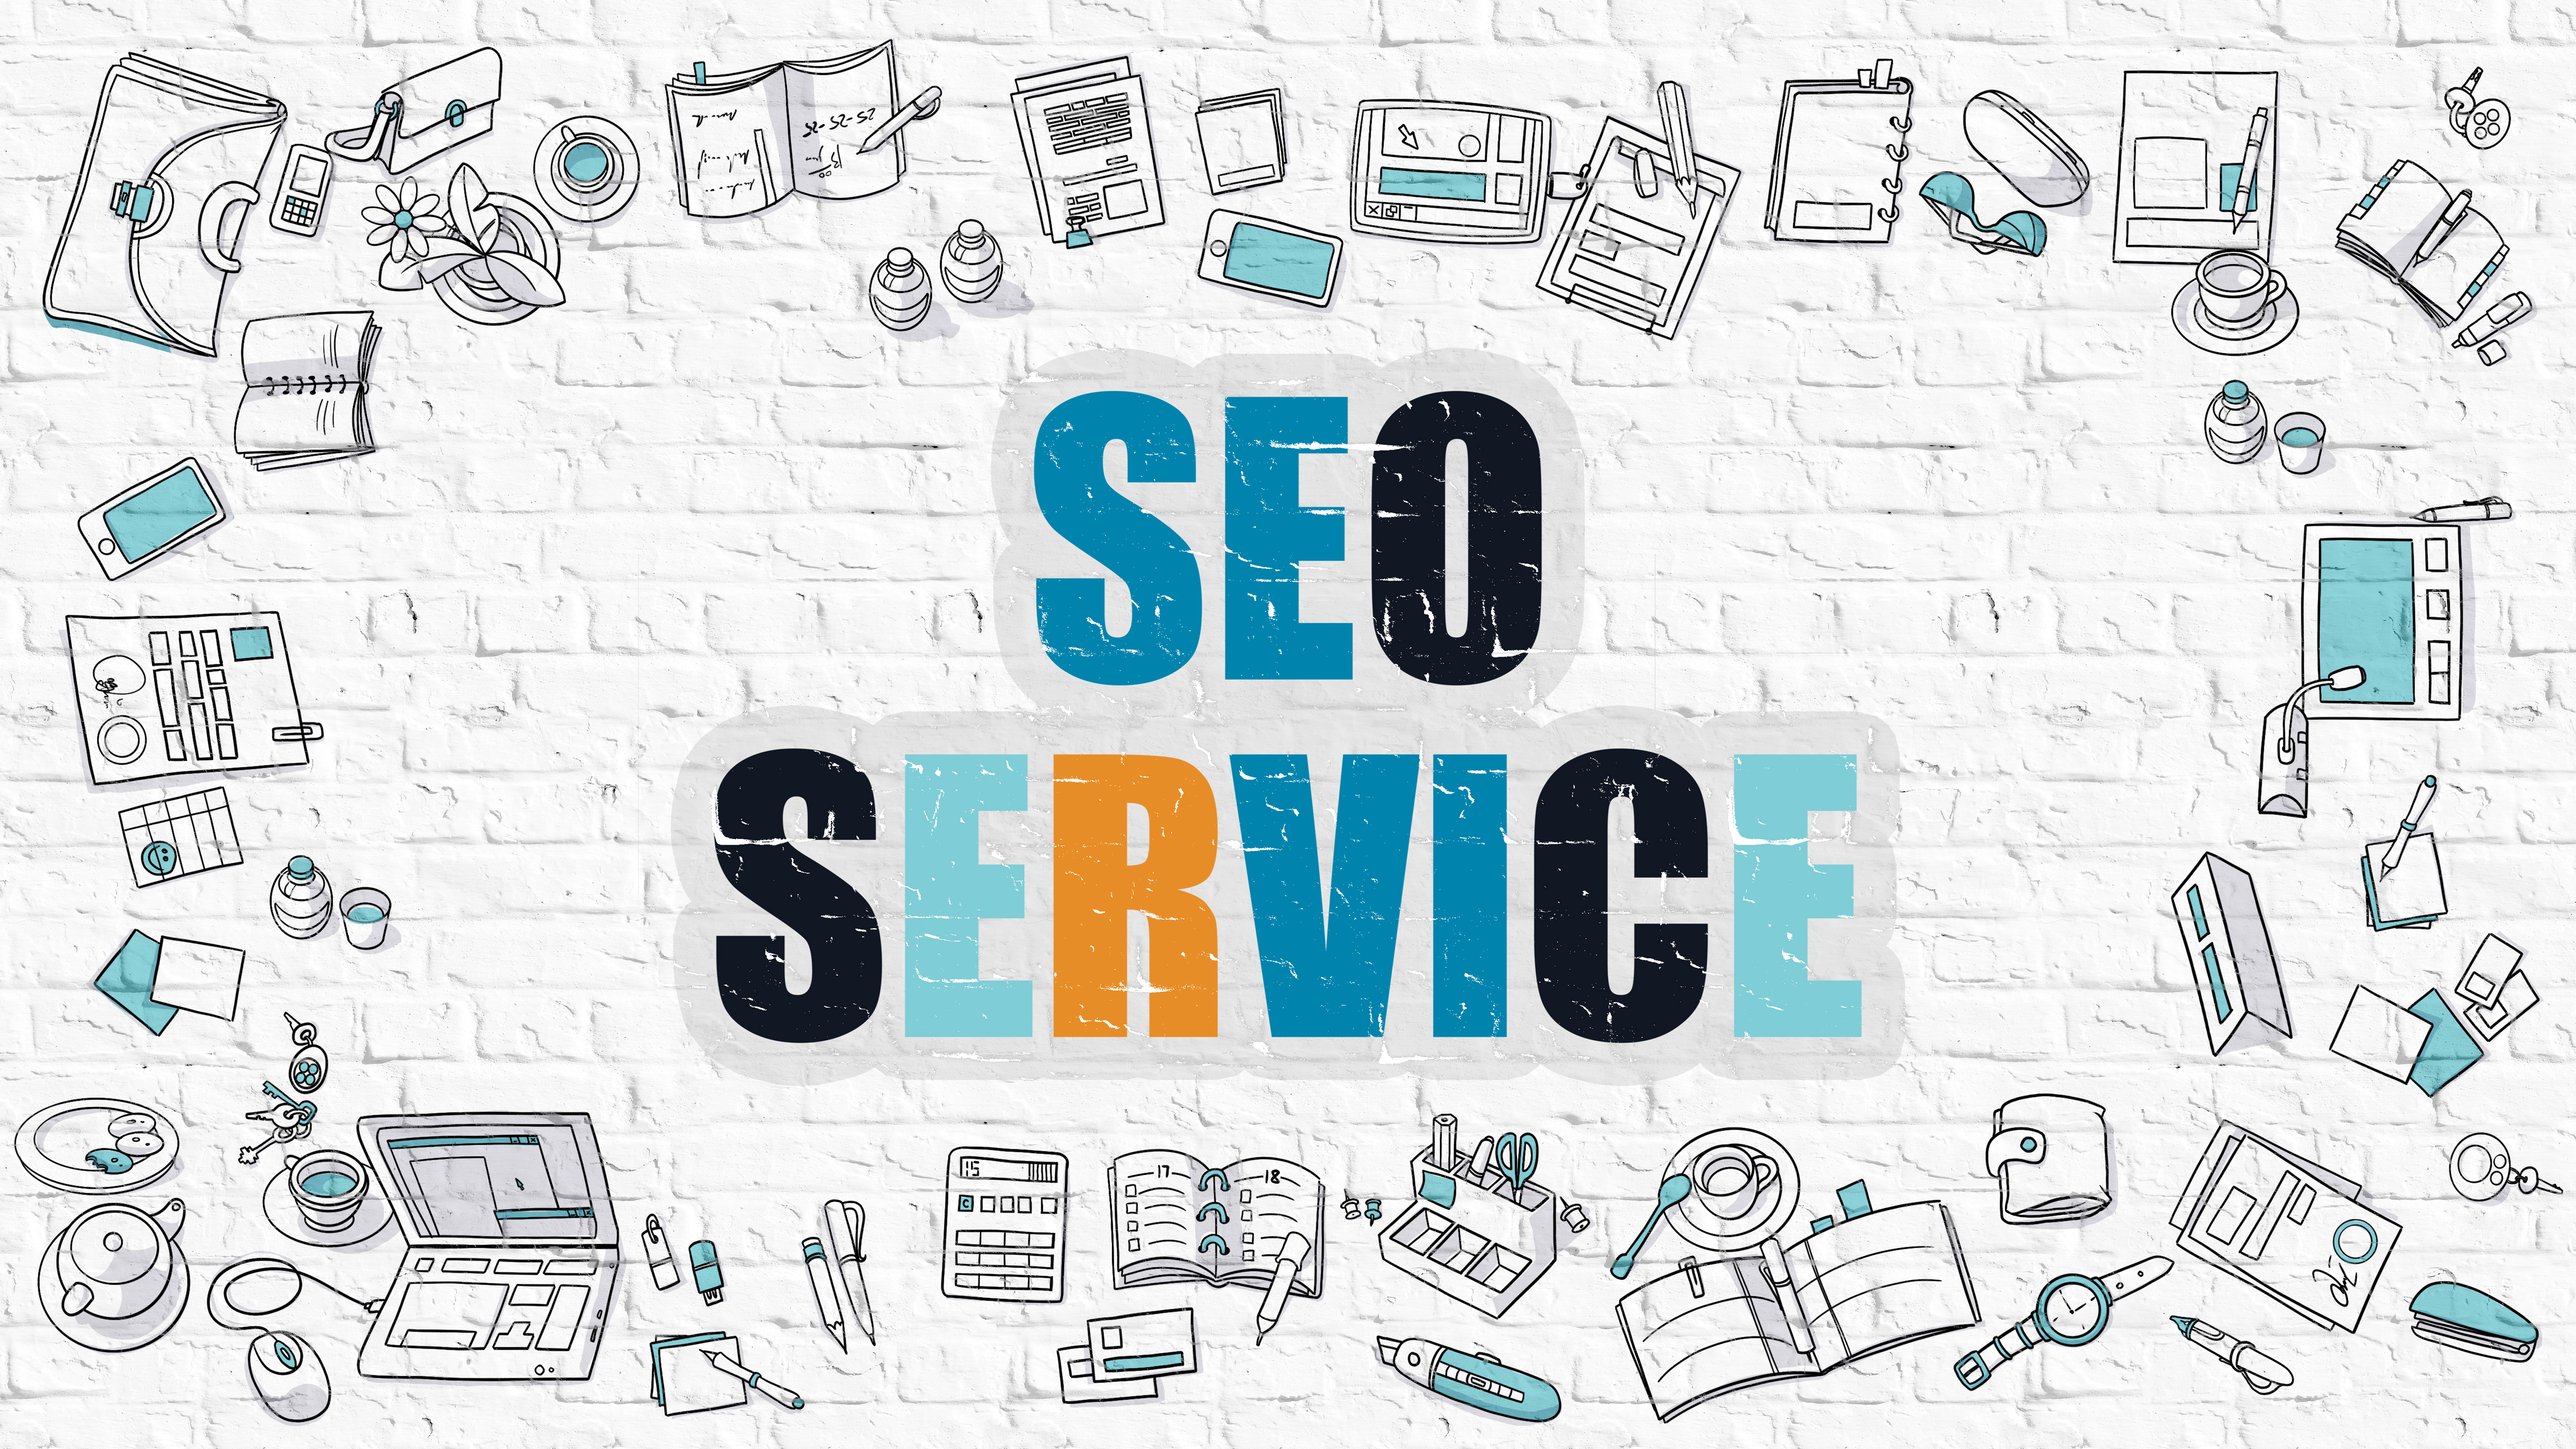 Best SEO services